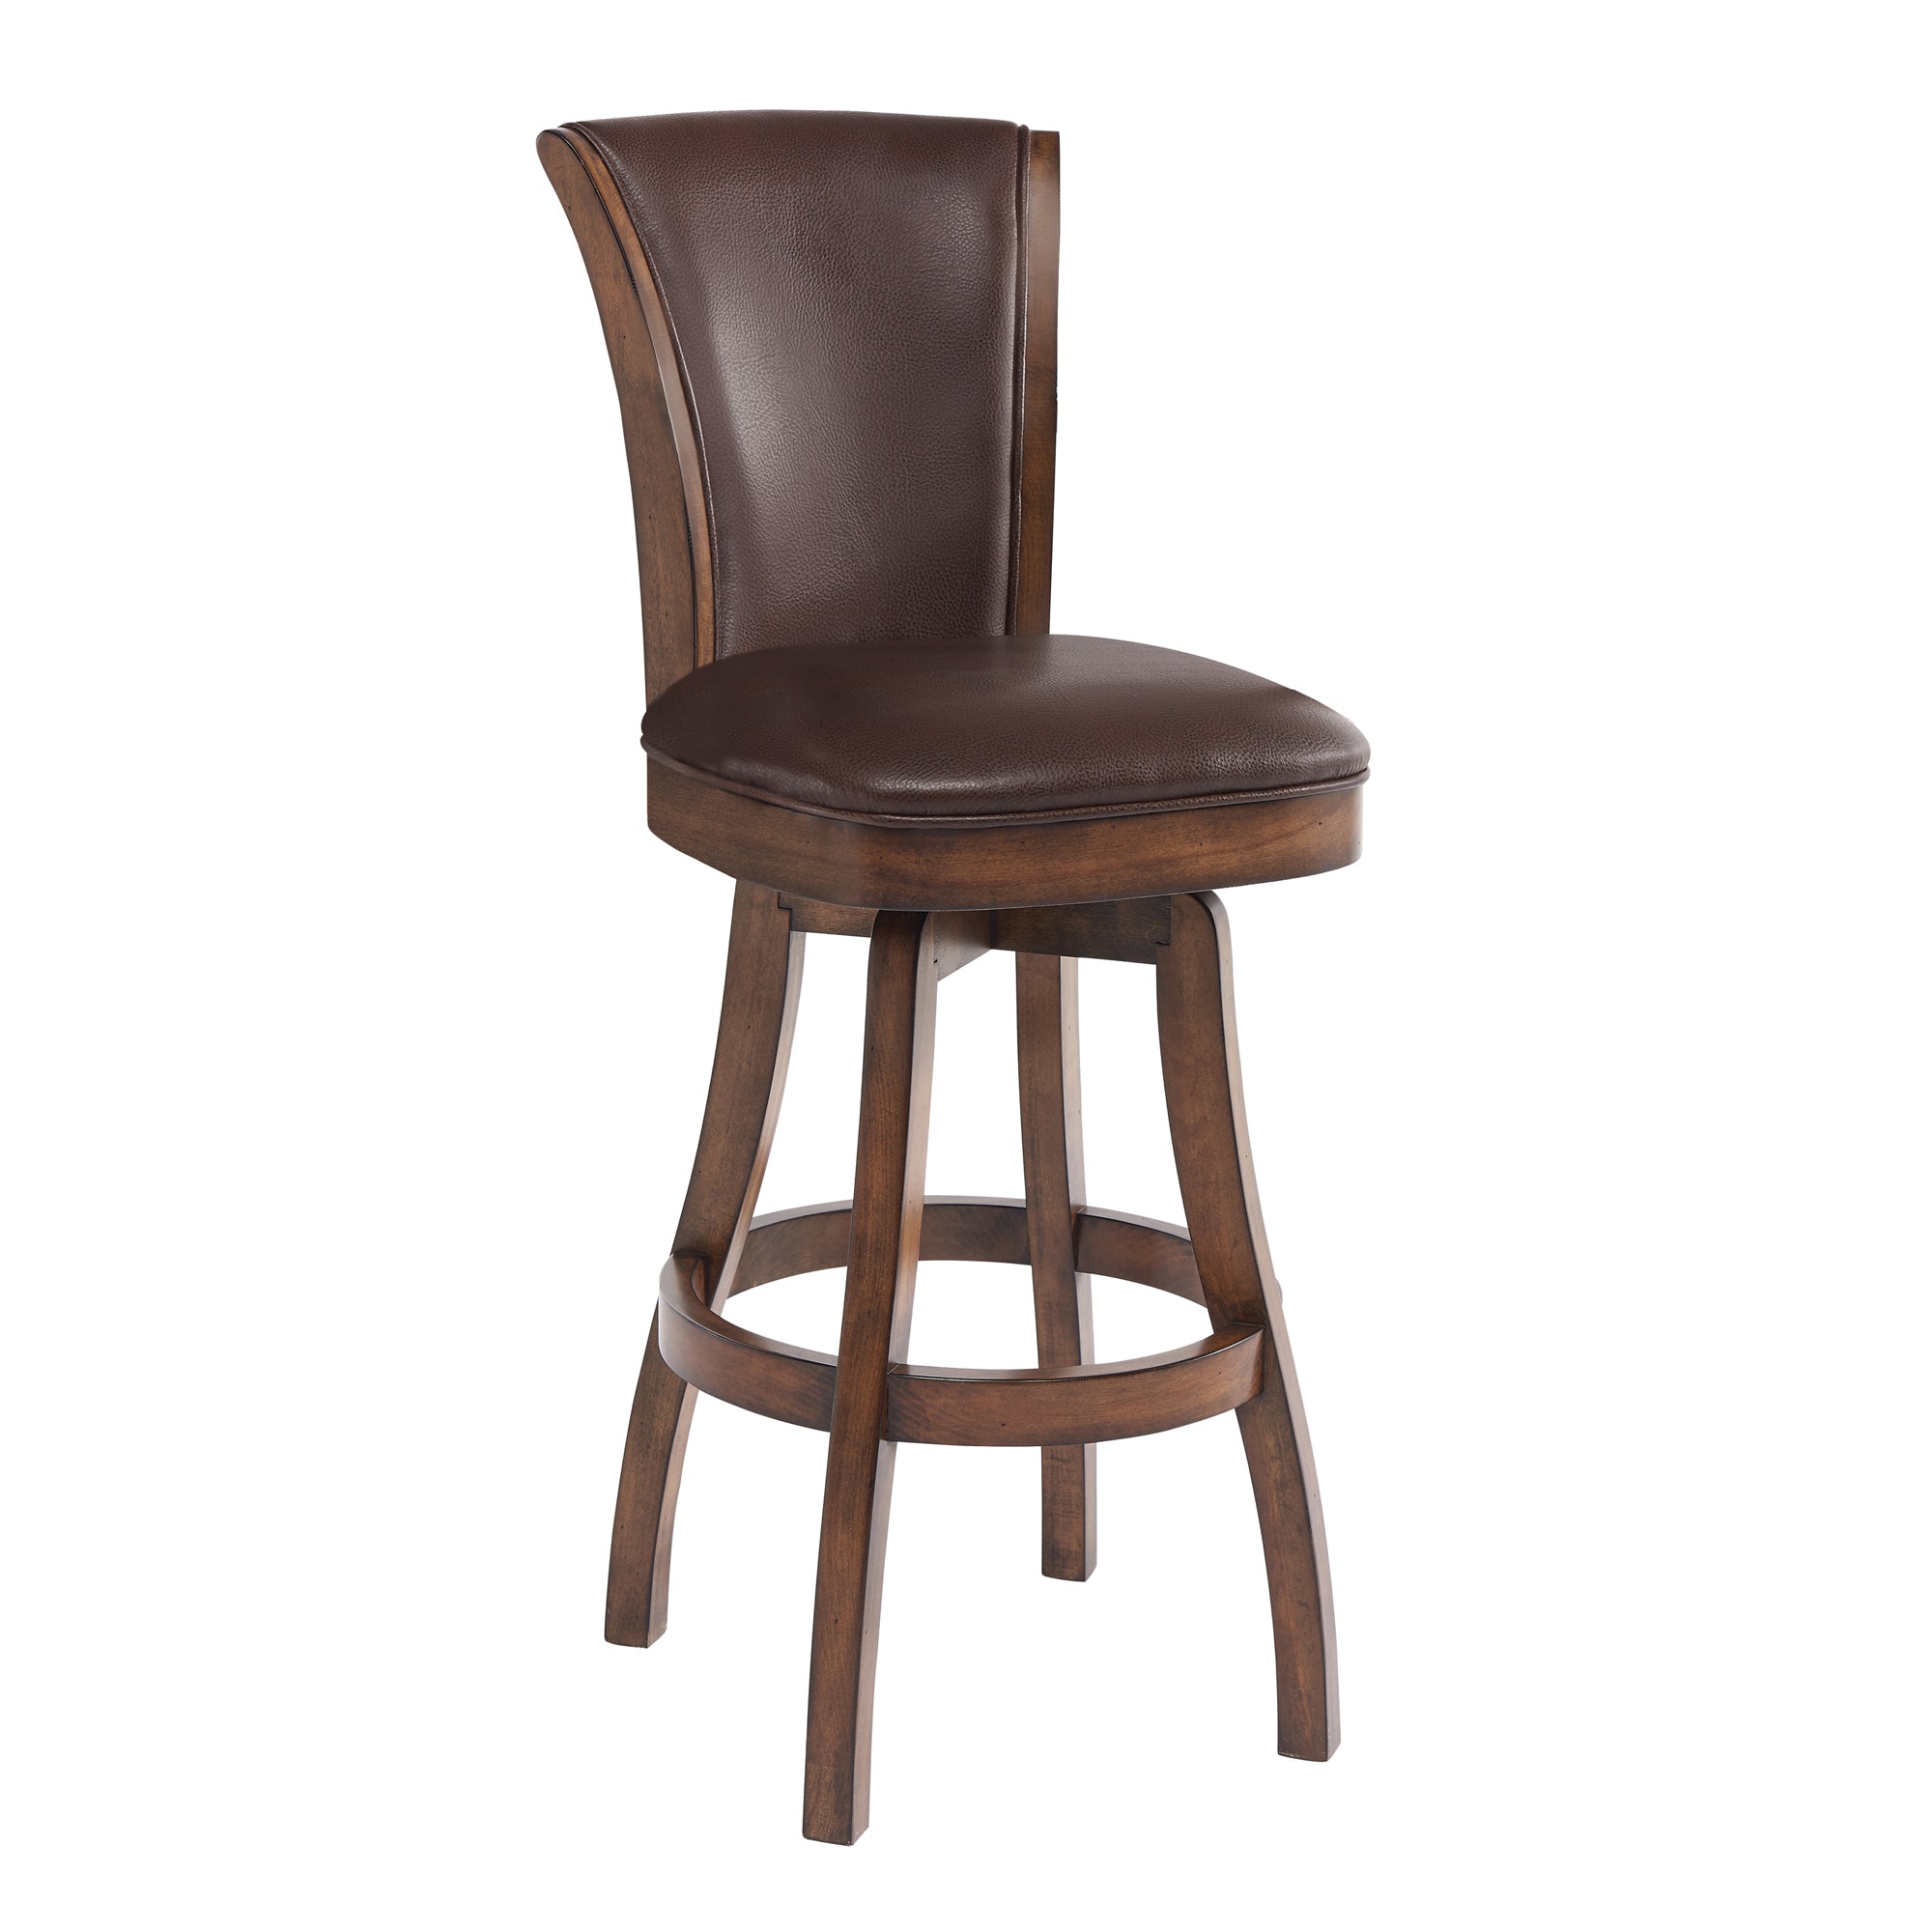 Armen Living Lcrabasikach30 Raleigh 30" Bar Height Swivel Wood Barstool In Chestnut Finish And Kahlua Faux Leather